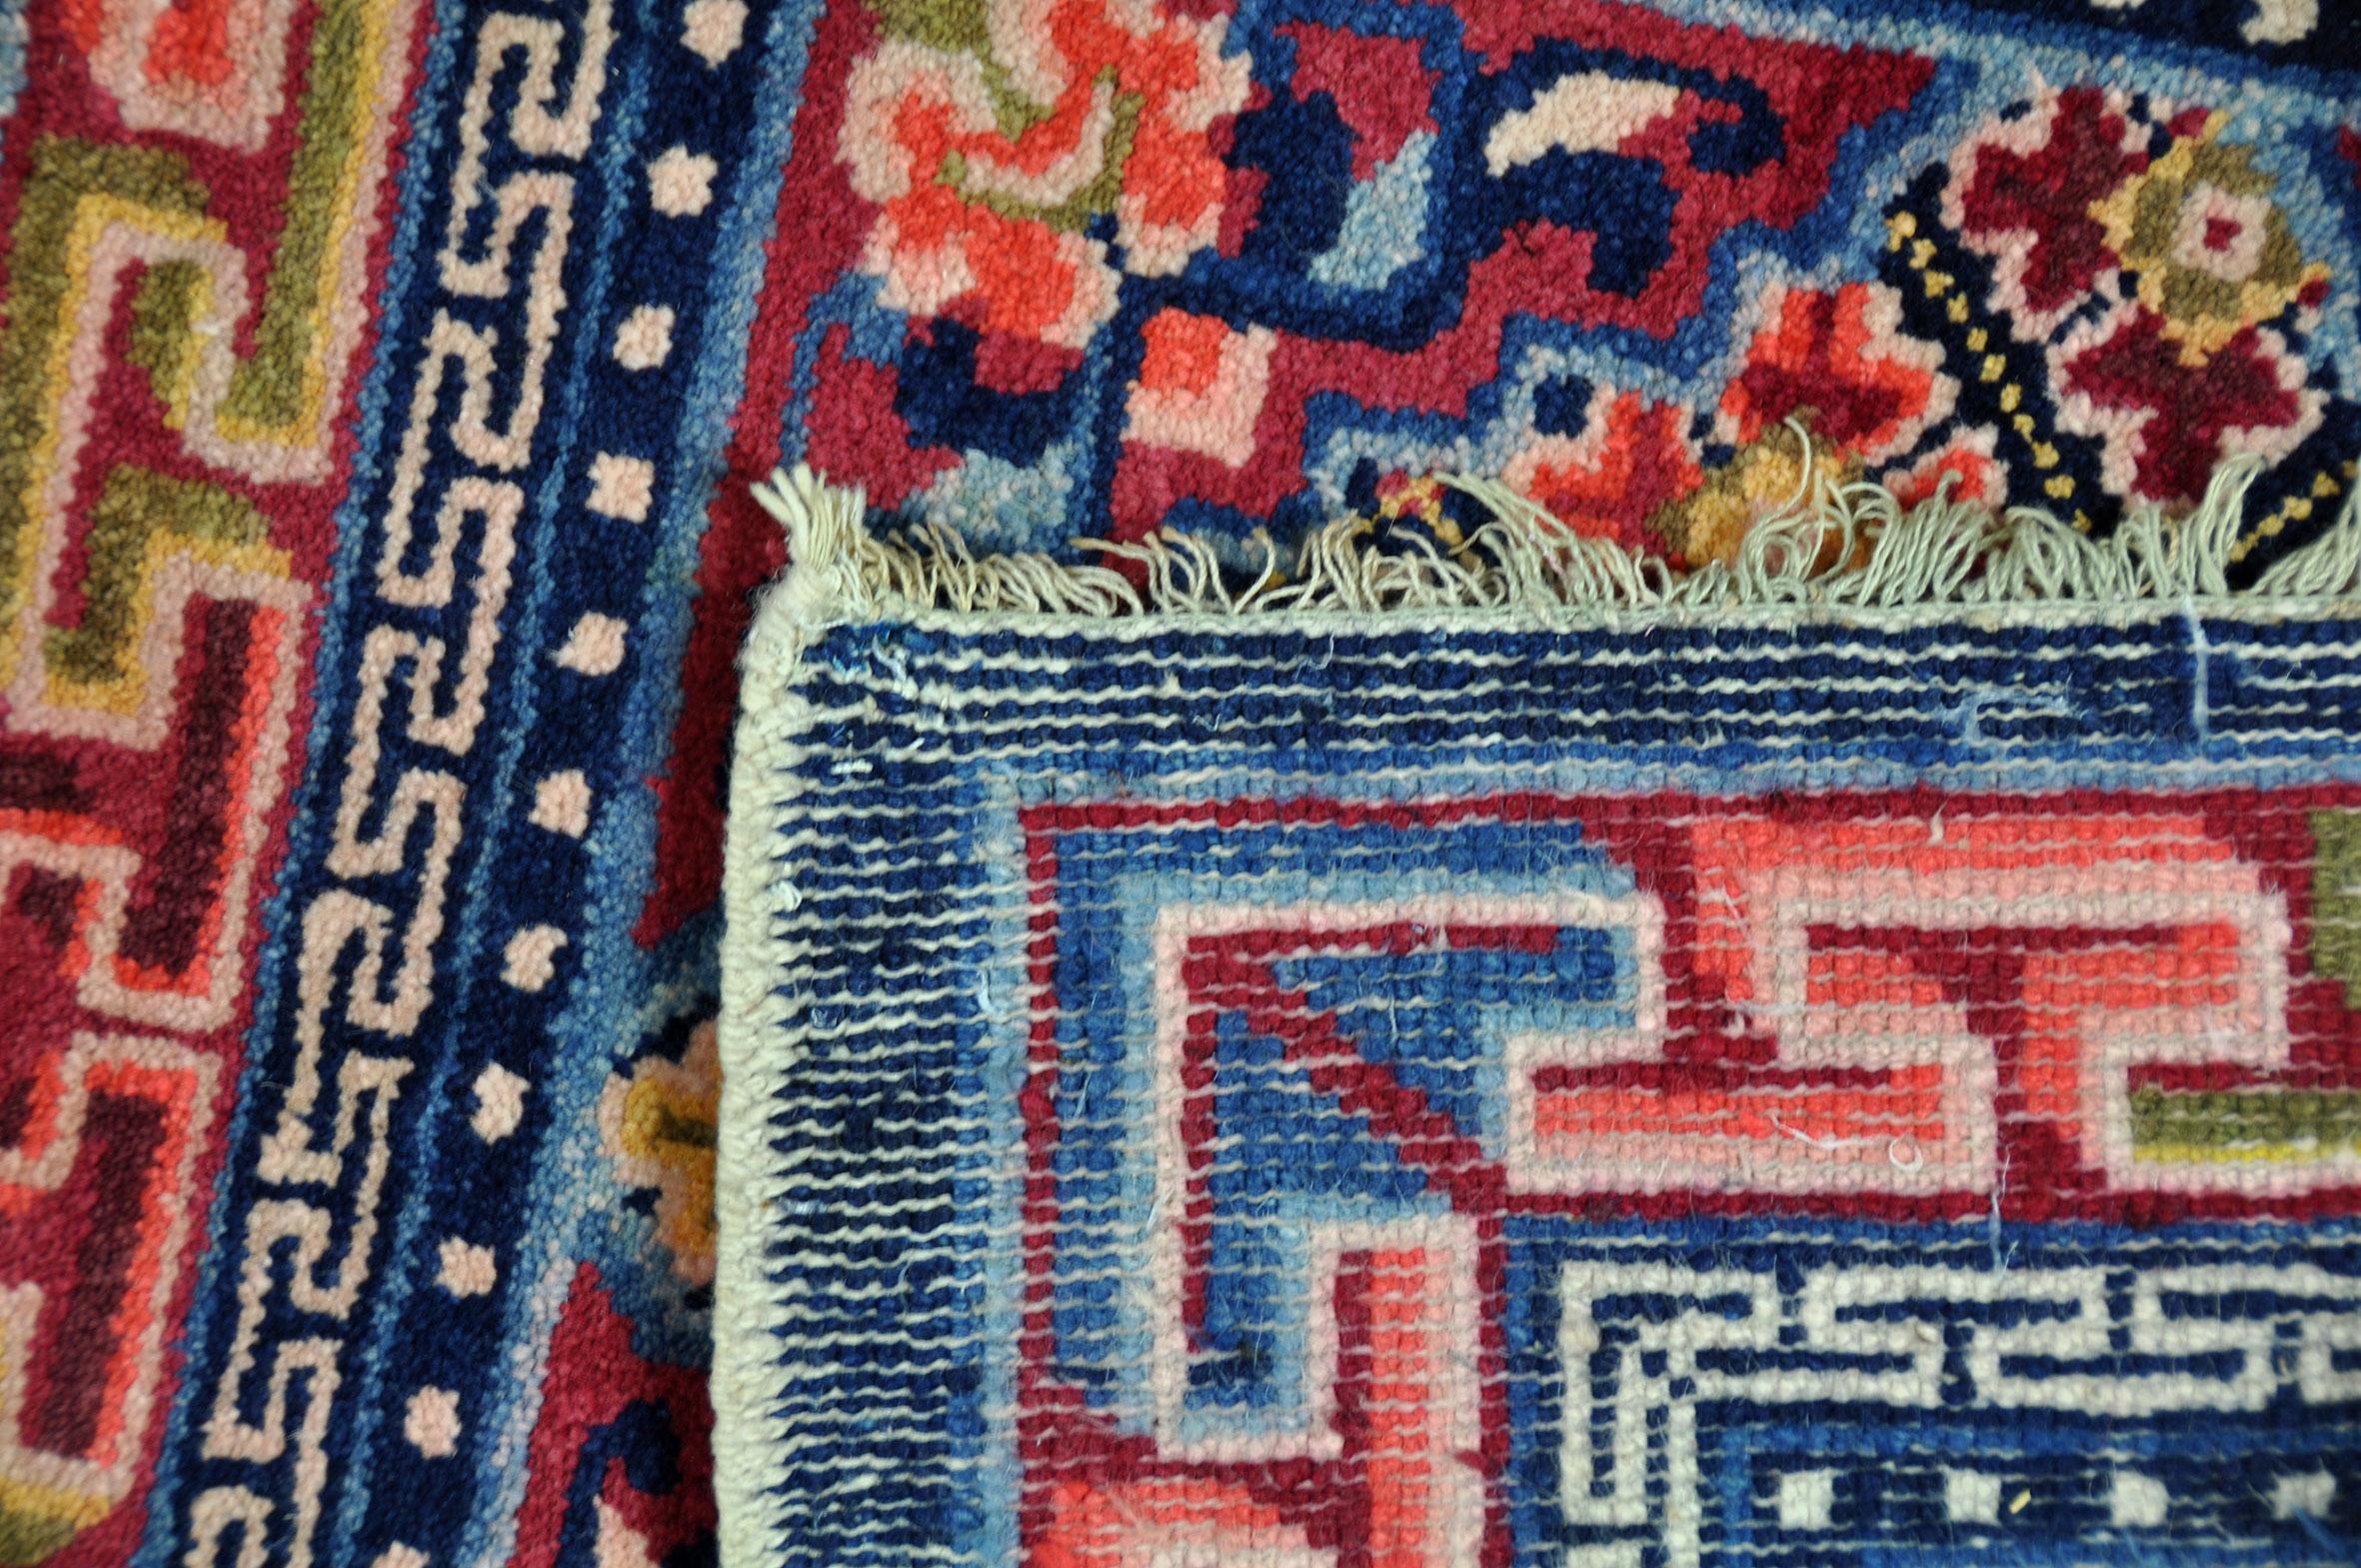 Eccentric square Chinese rug where bright colors and ingenious design play a leading role.
Typical of these Chinese rugs is the use of spatial shadow effects. This effect can certainly be found in the Meander motif in the edge of this fine hand